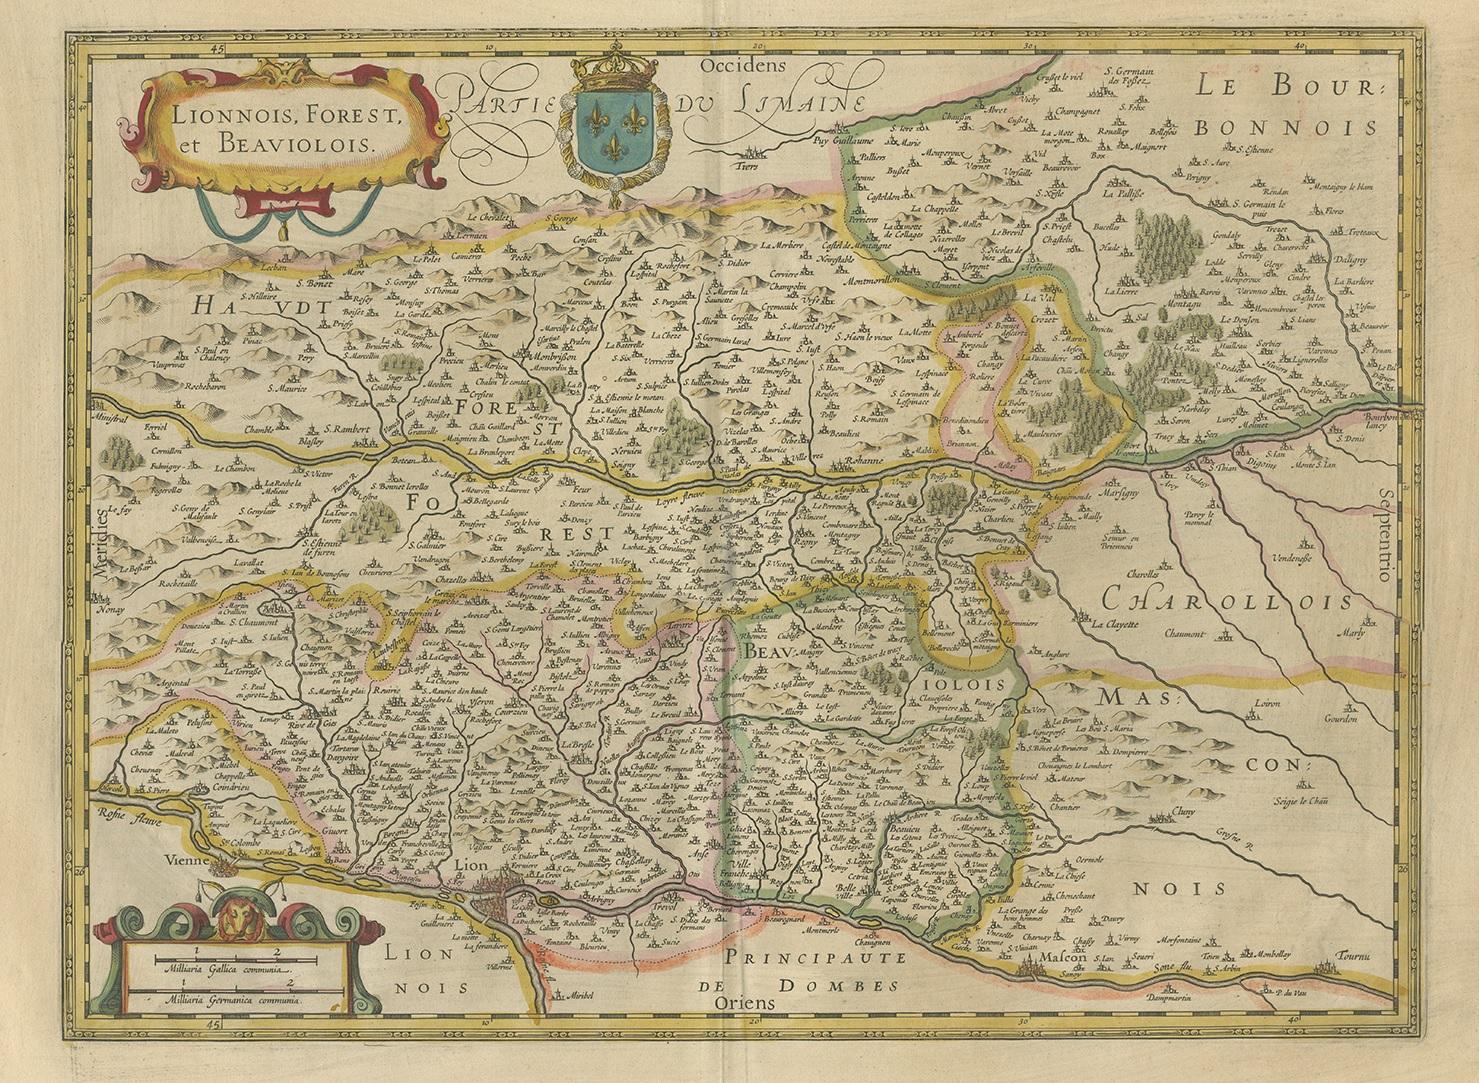 Antique map titled 'Lionnois, Forest et Beauiolois'. Old map of the former region of Lyon, Vienne, Bresse, Rohan and the Rhône River. This map originates from a composite atlas and most likely published by Hondius.